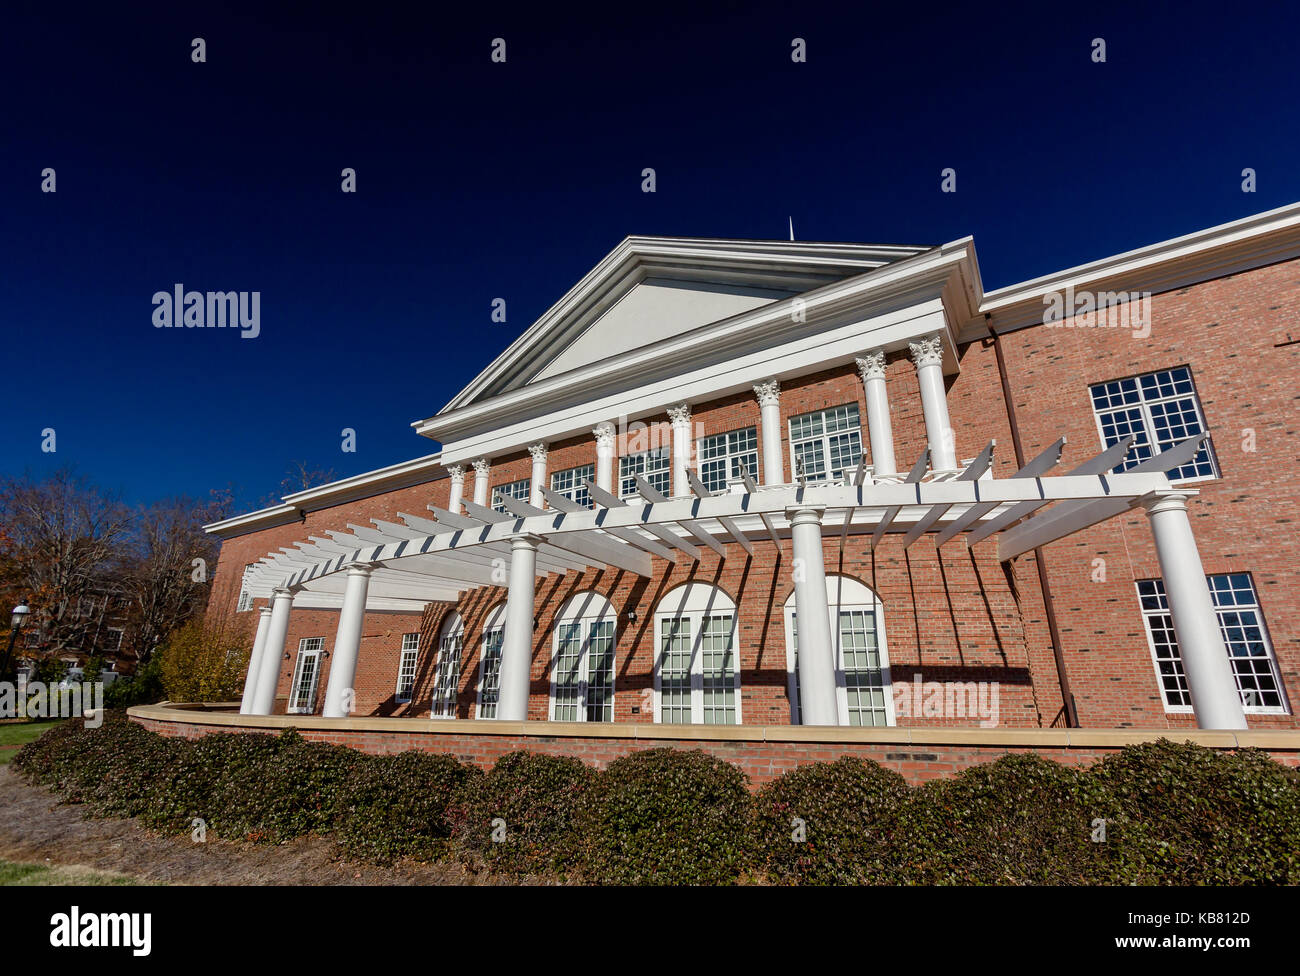 Martha S. and Carl H. Linder III Hall, College of Arts and Sciences at Elon University in Elon, North Carolina.  Built in 2009. Stock Photo